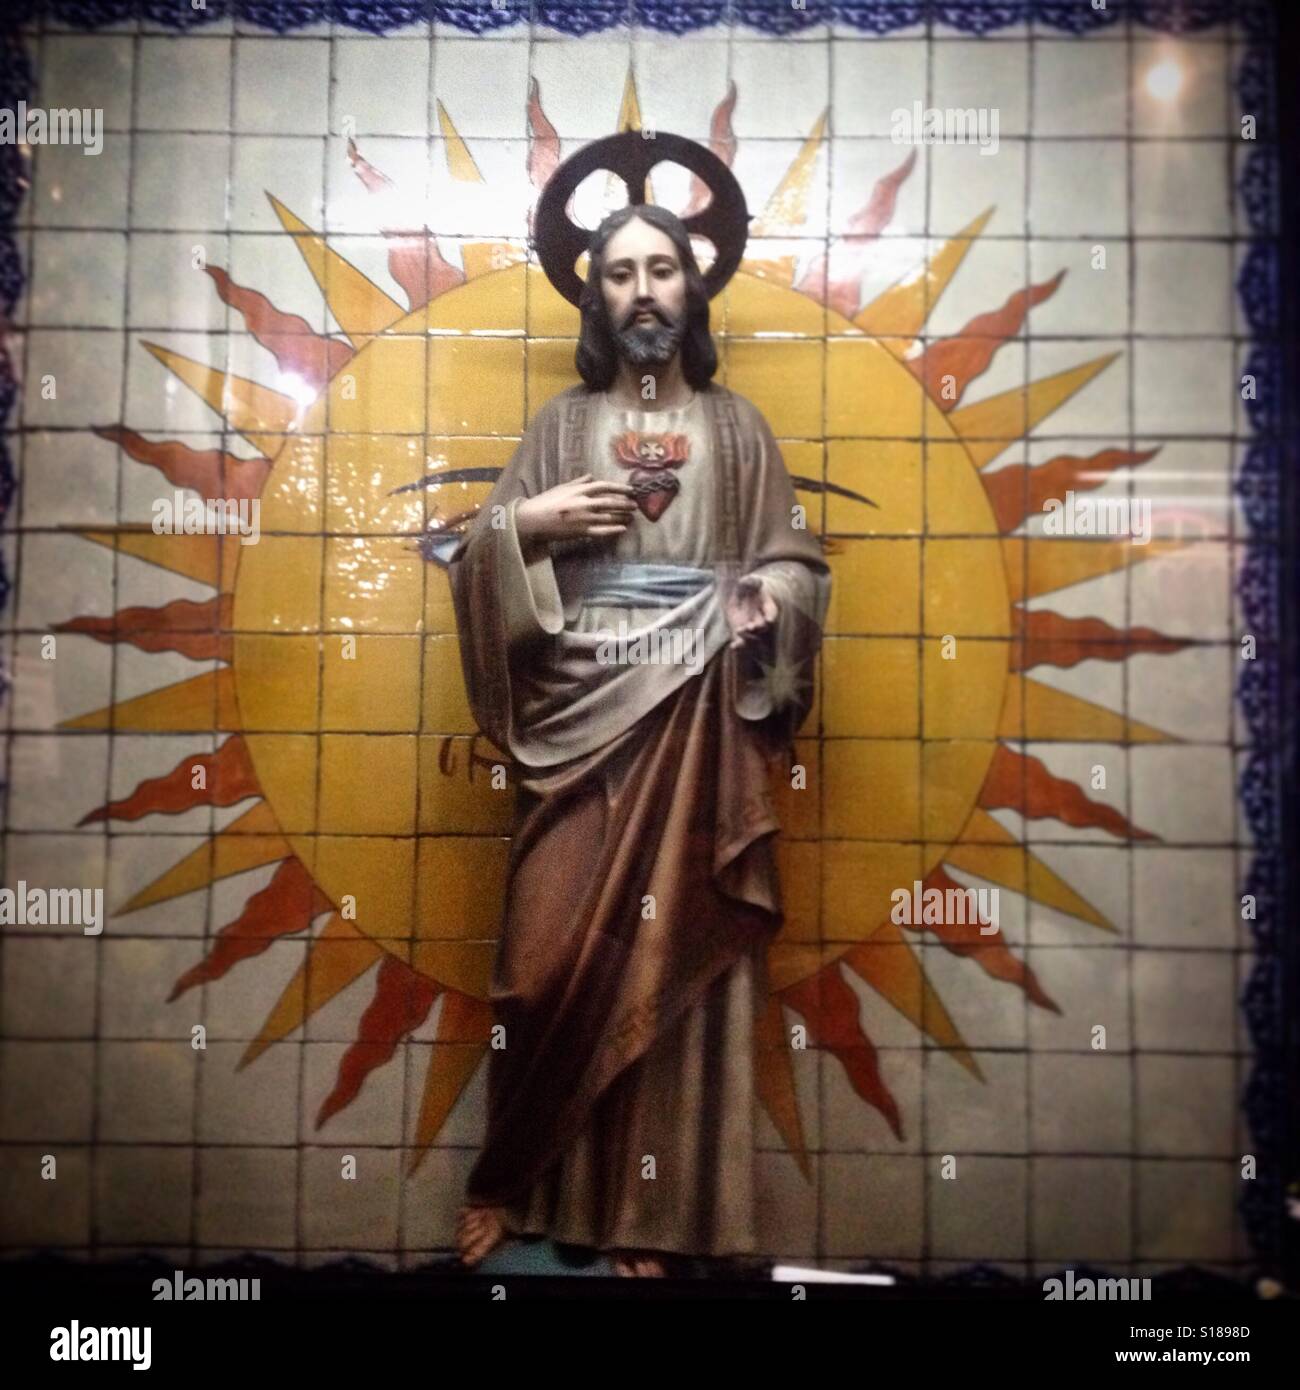 An image of the Sacred Heart of Jesus in front of a sun made with ceramic tiles decorates the Capilla del Cerrito of the Basilica o Guadalupe in Mexico City, Mexico Stock Photo